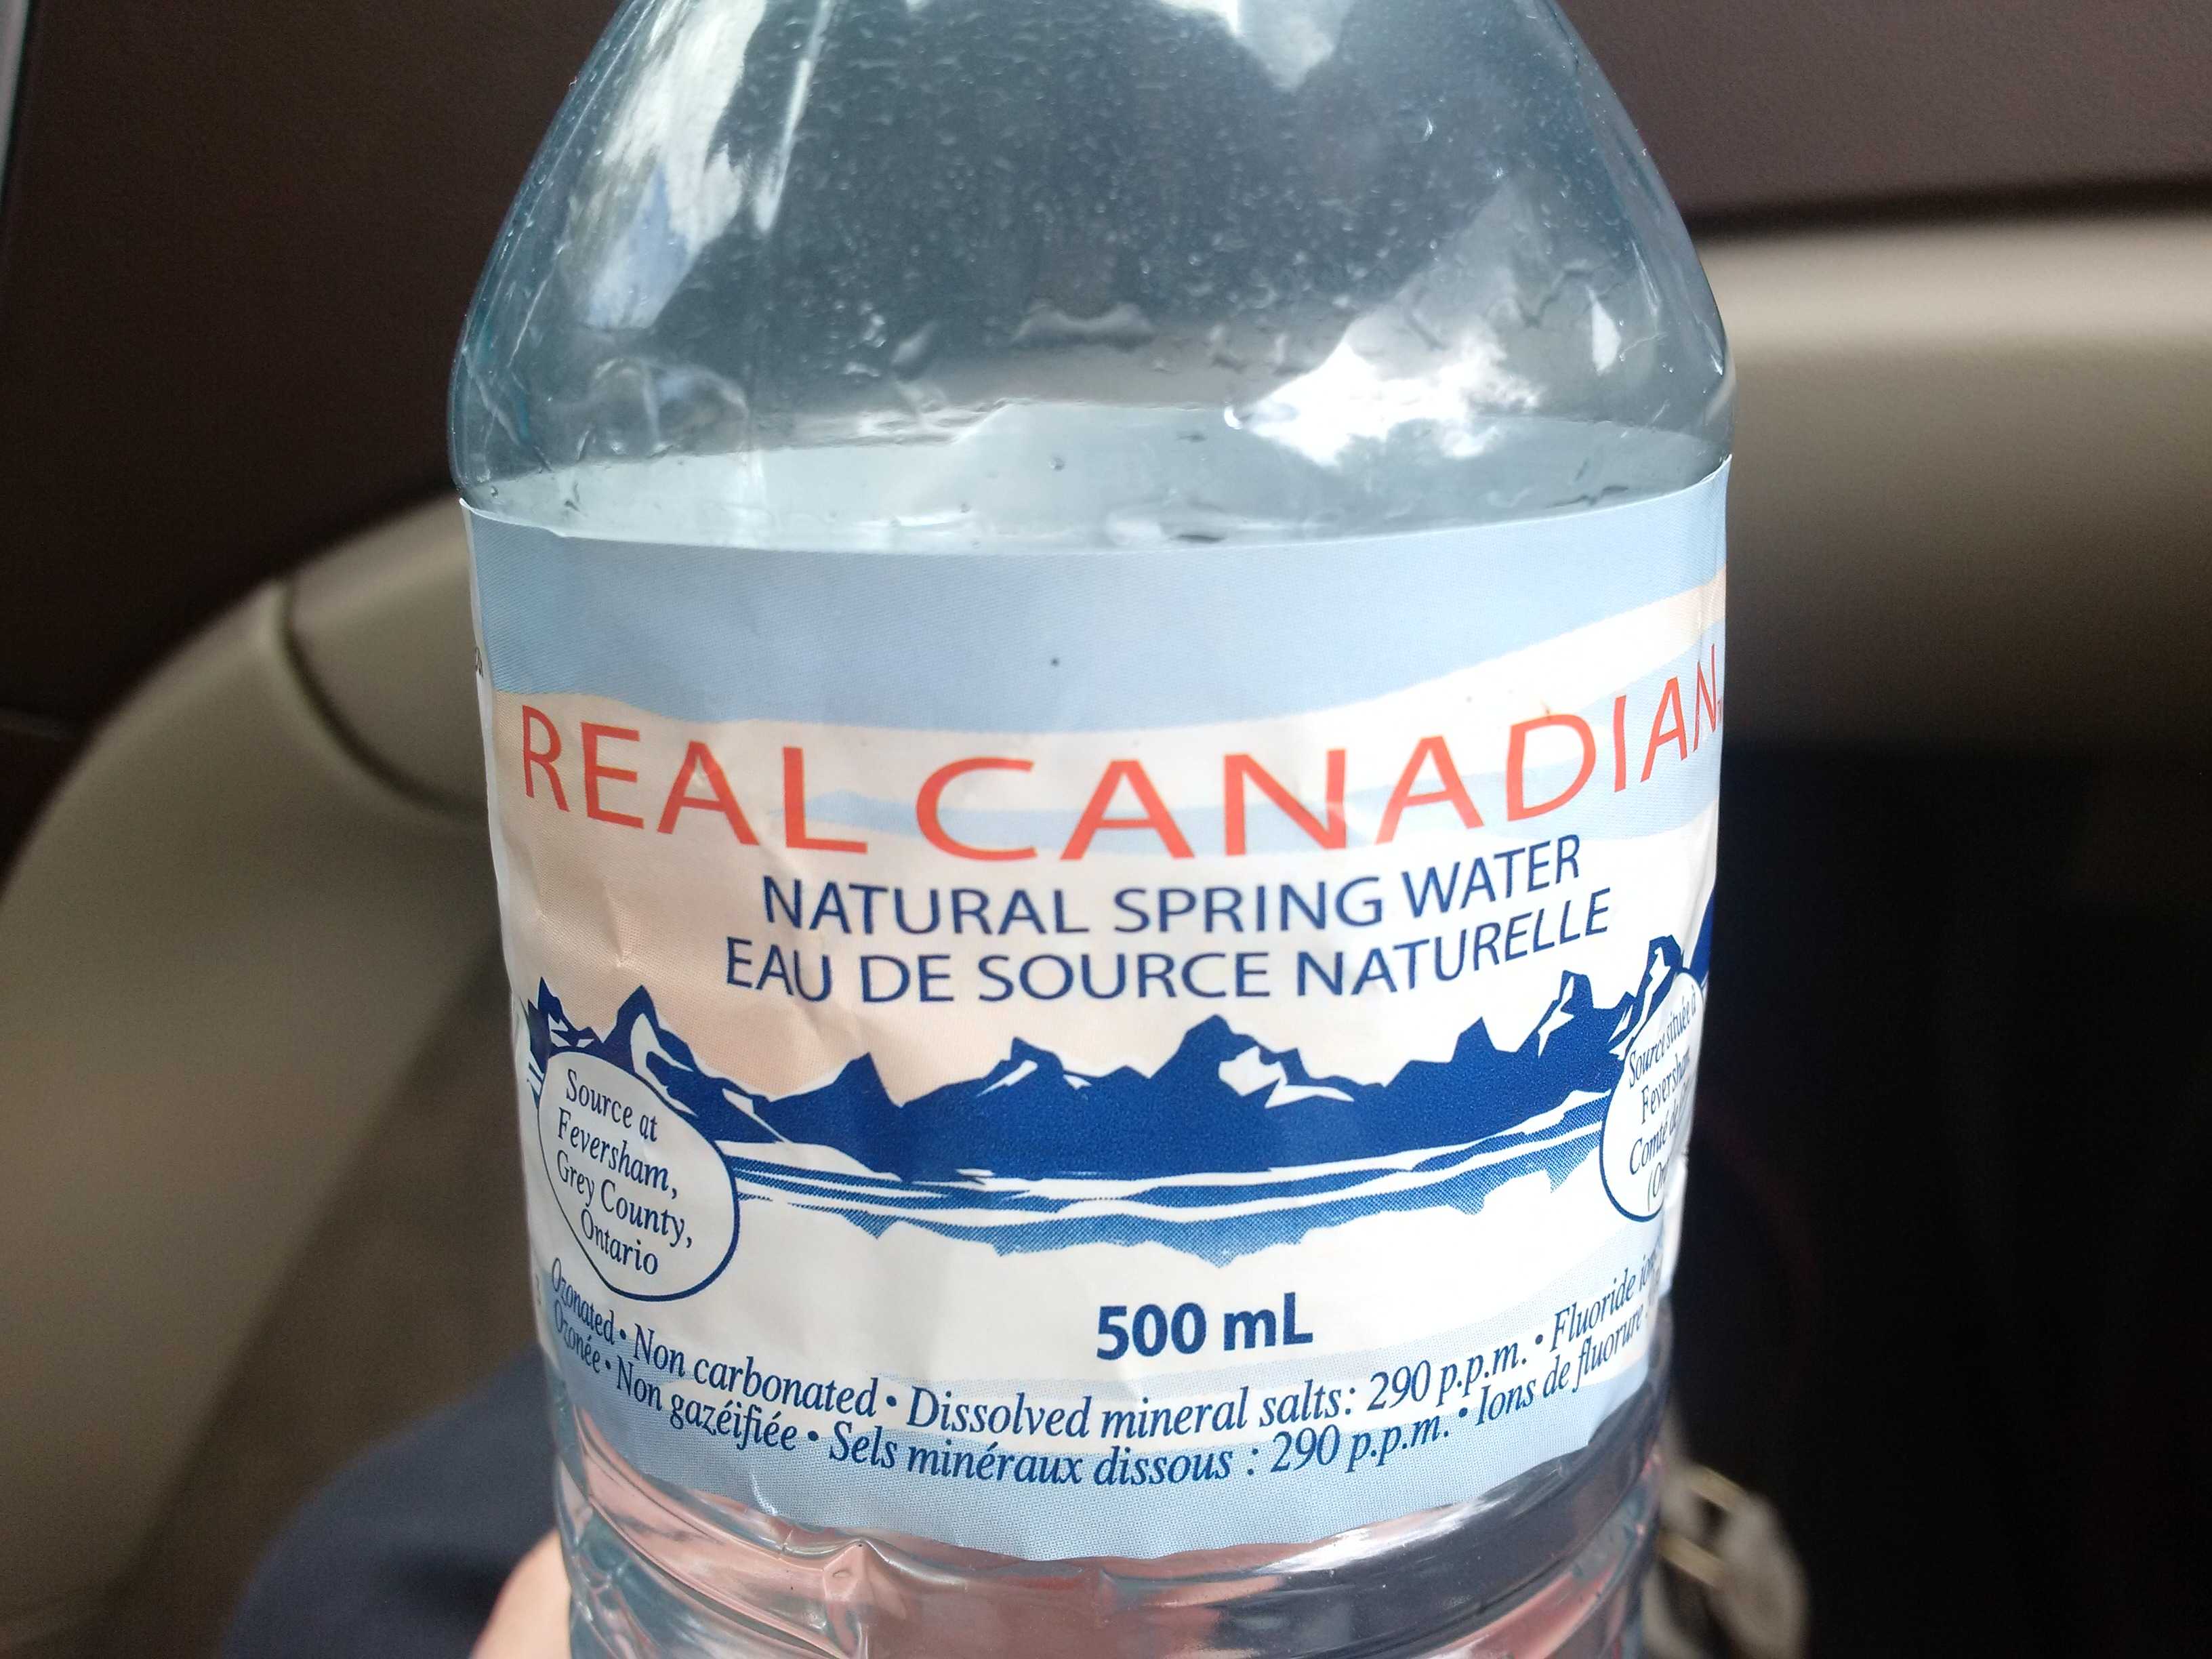 Buy Canadian First on Twitter: "Real Canadian spring water from Feversham,  Grey County, Ontario. #CanadianVacation http://t.co/HppMBc1CqC" / Twitter